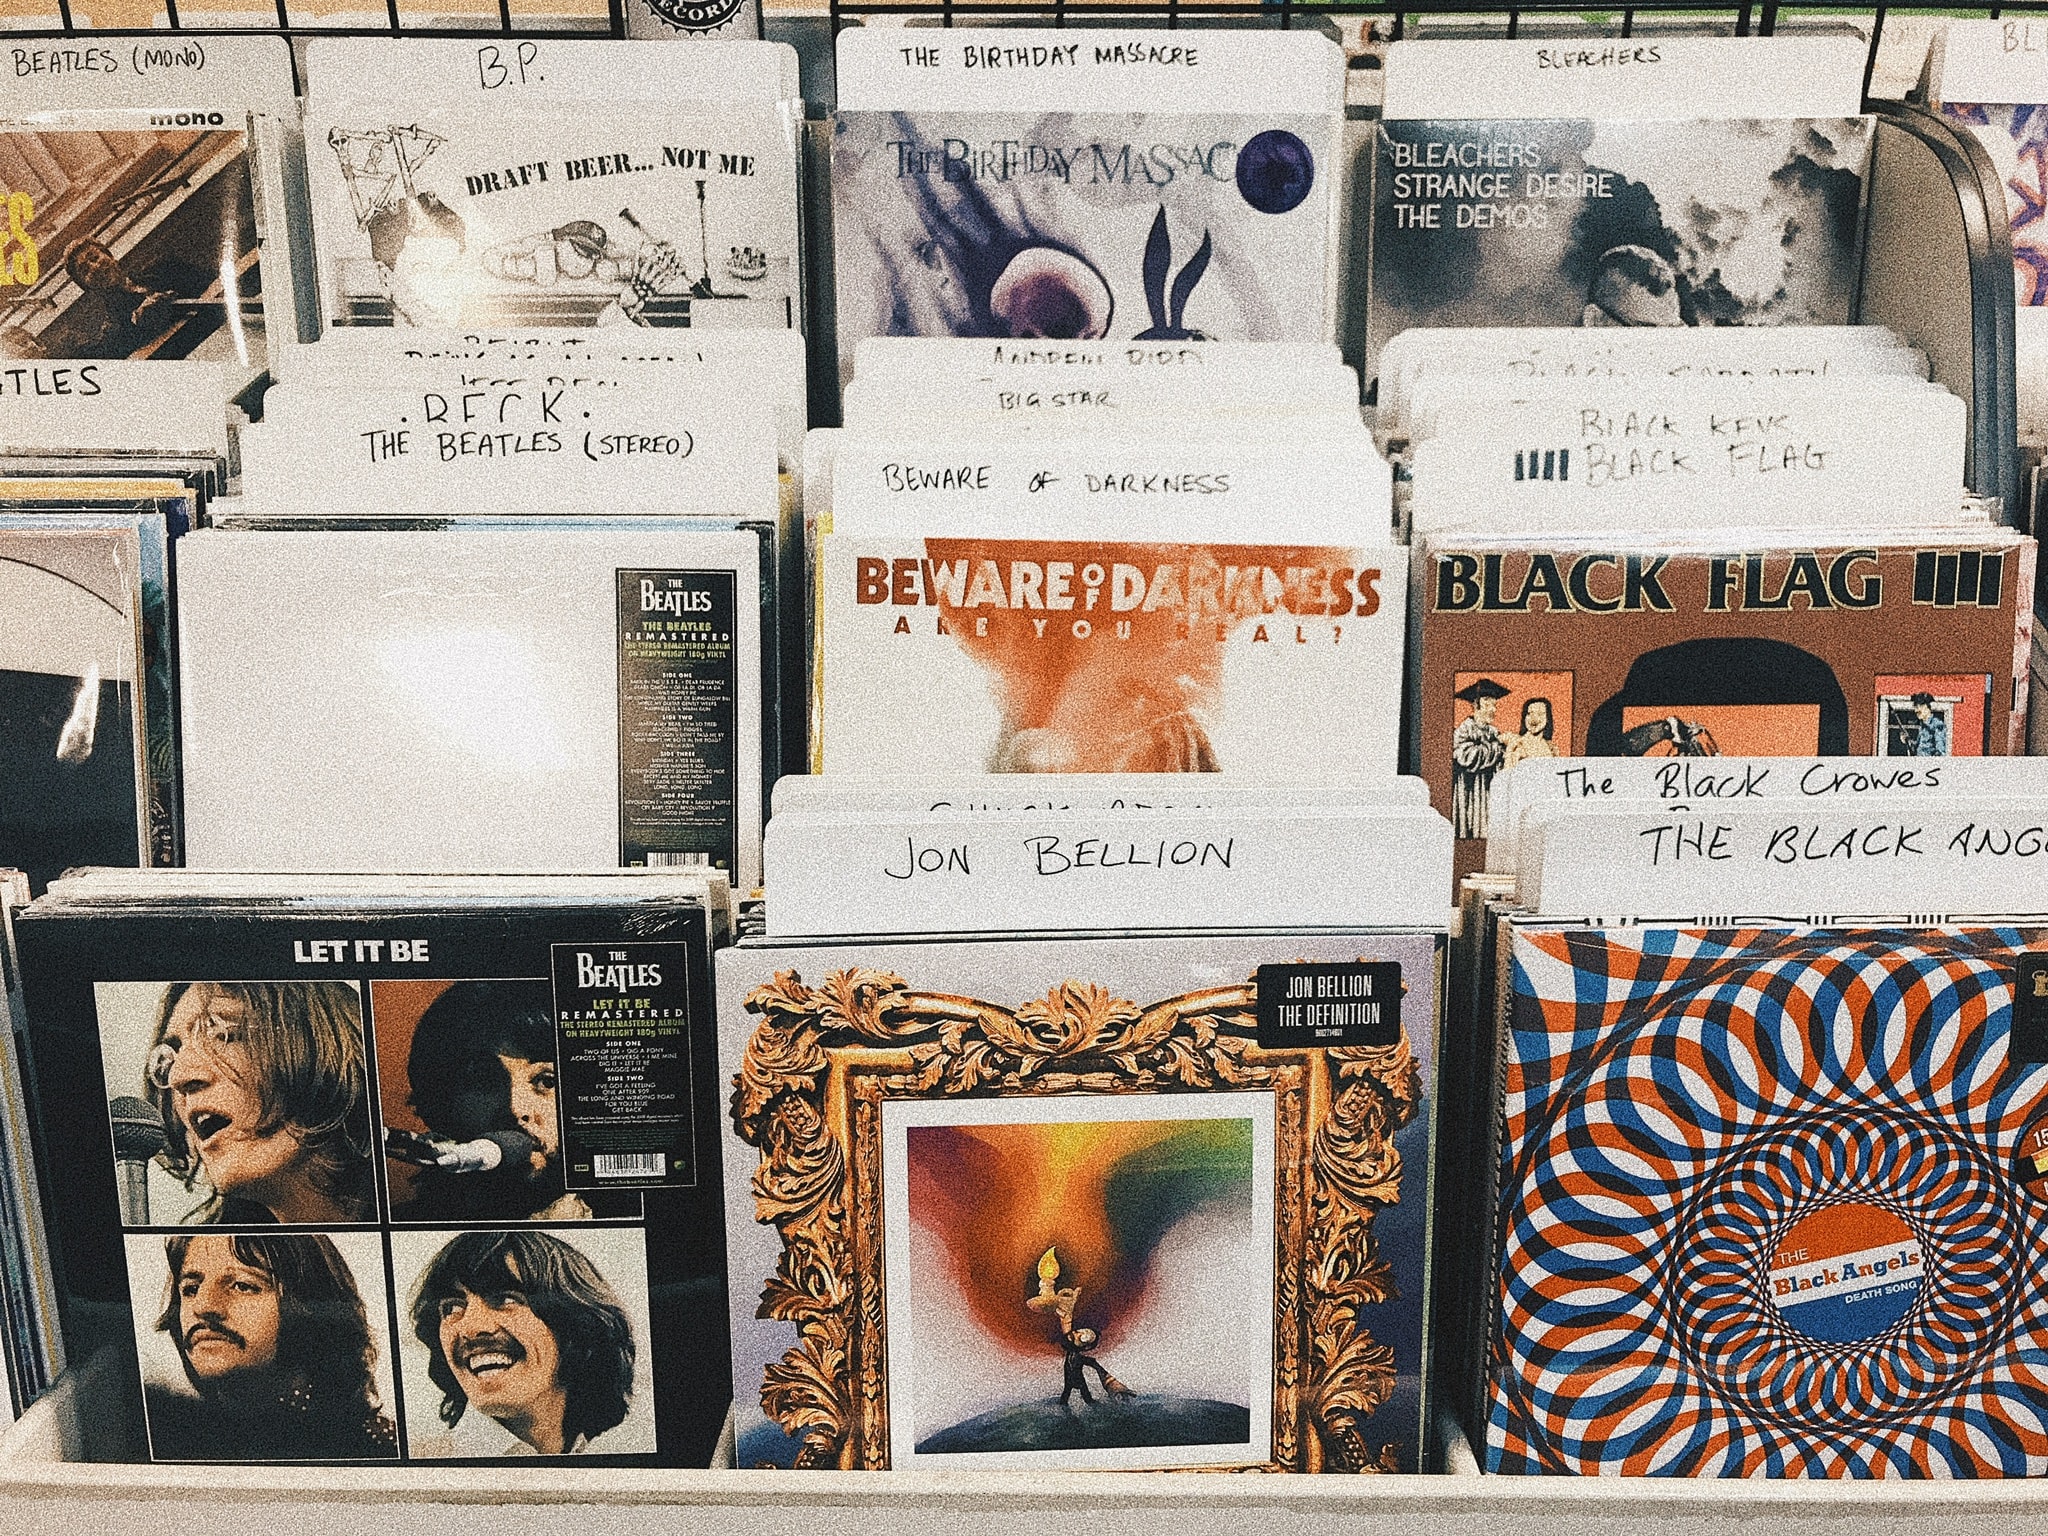 alt text: collection of vinyl records